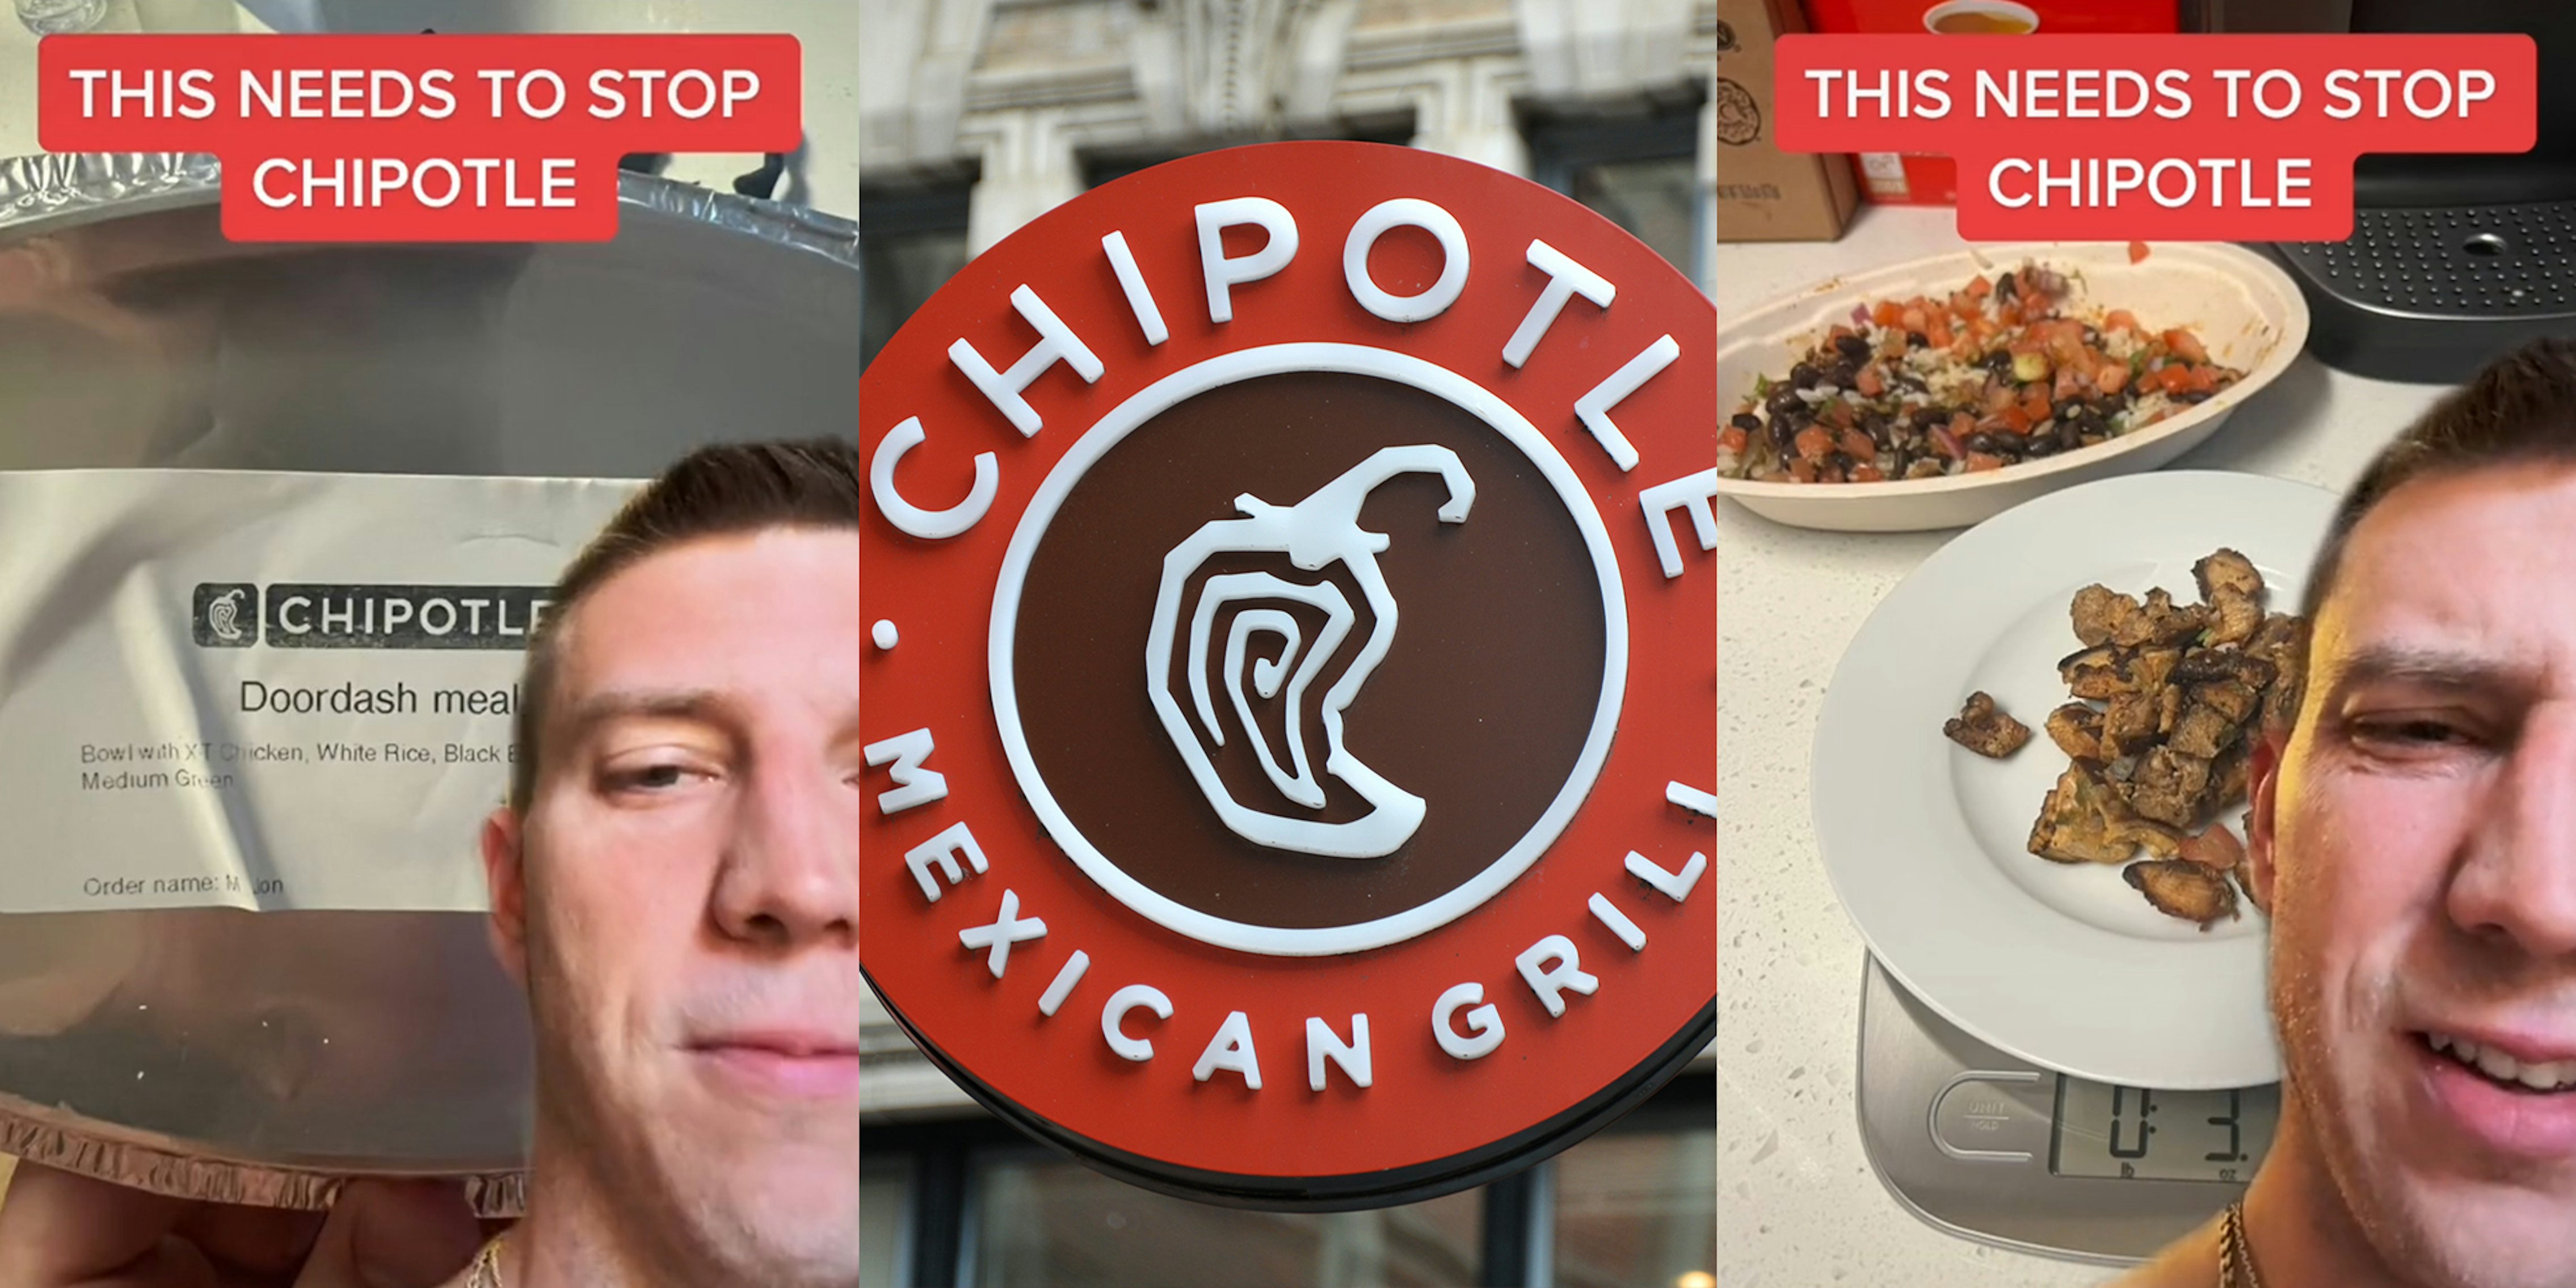 man with chipotle doordash meal and caption 'this needs to stop chipotle' (l) Chipotle mexican grill sign (c) man with dish on scale and caption 'this needs to stop chipotle' (r)